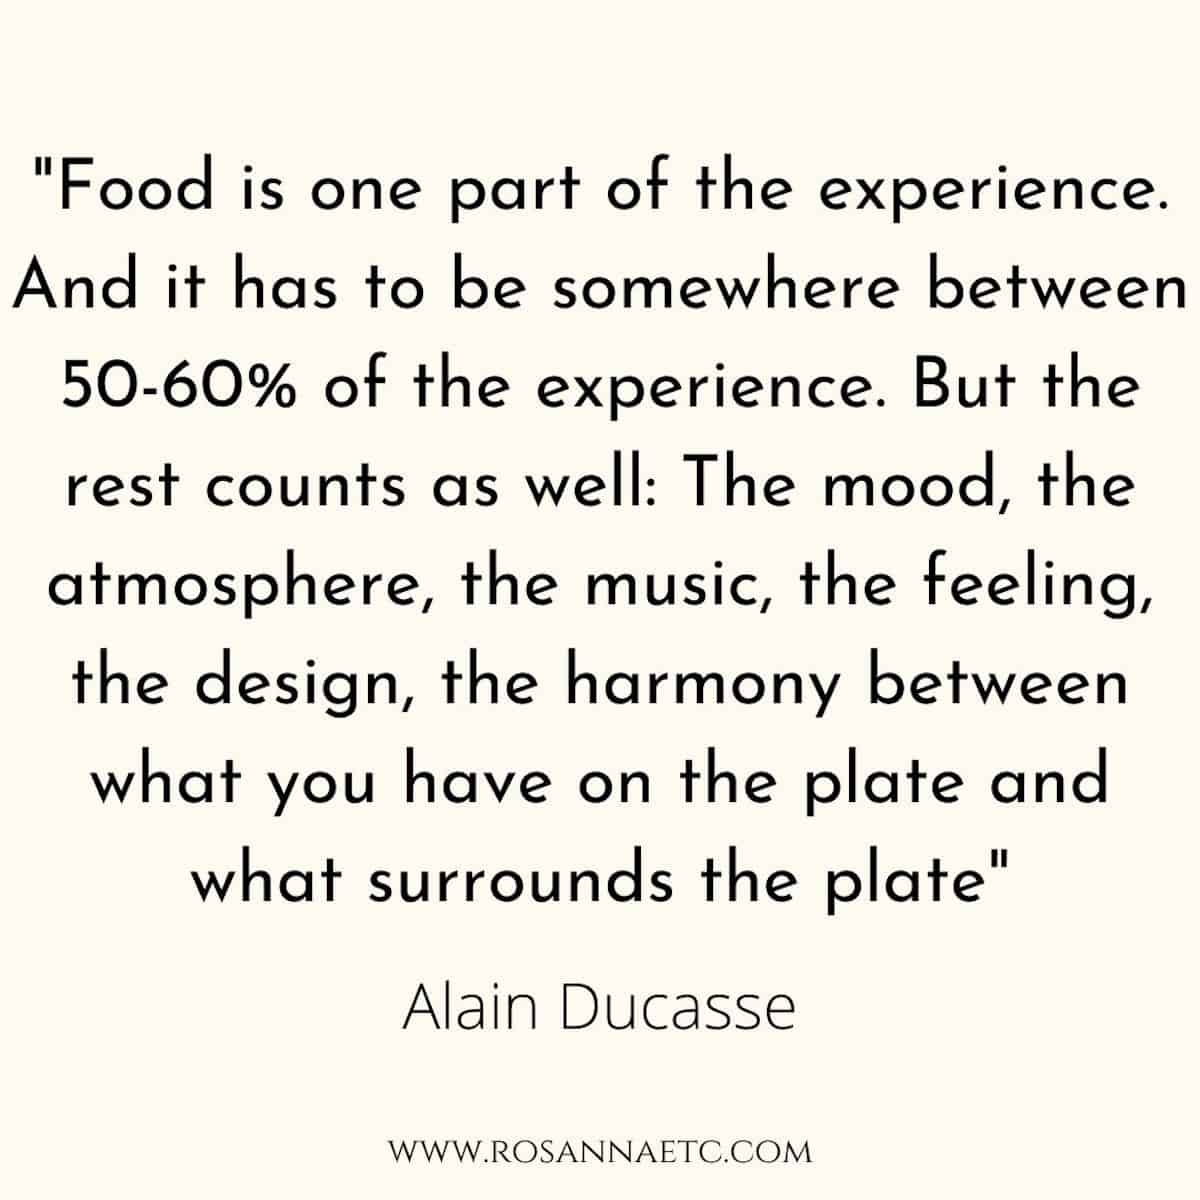 A quote from Alain Ducasse that reads "Food is one part of the experience. And it has to be somewhere between 50 to 60 percent of the dining experience. But the rest counts as well: The mood, the atmosphere, the music, the feeling, the design, the harmony between what you have on the plate and what surrounds the plate".